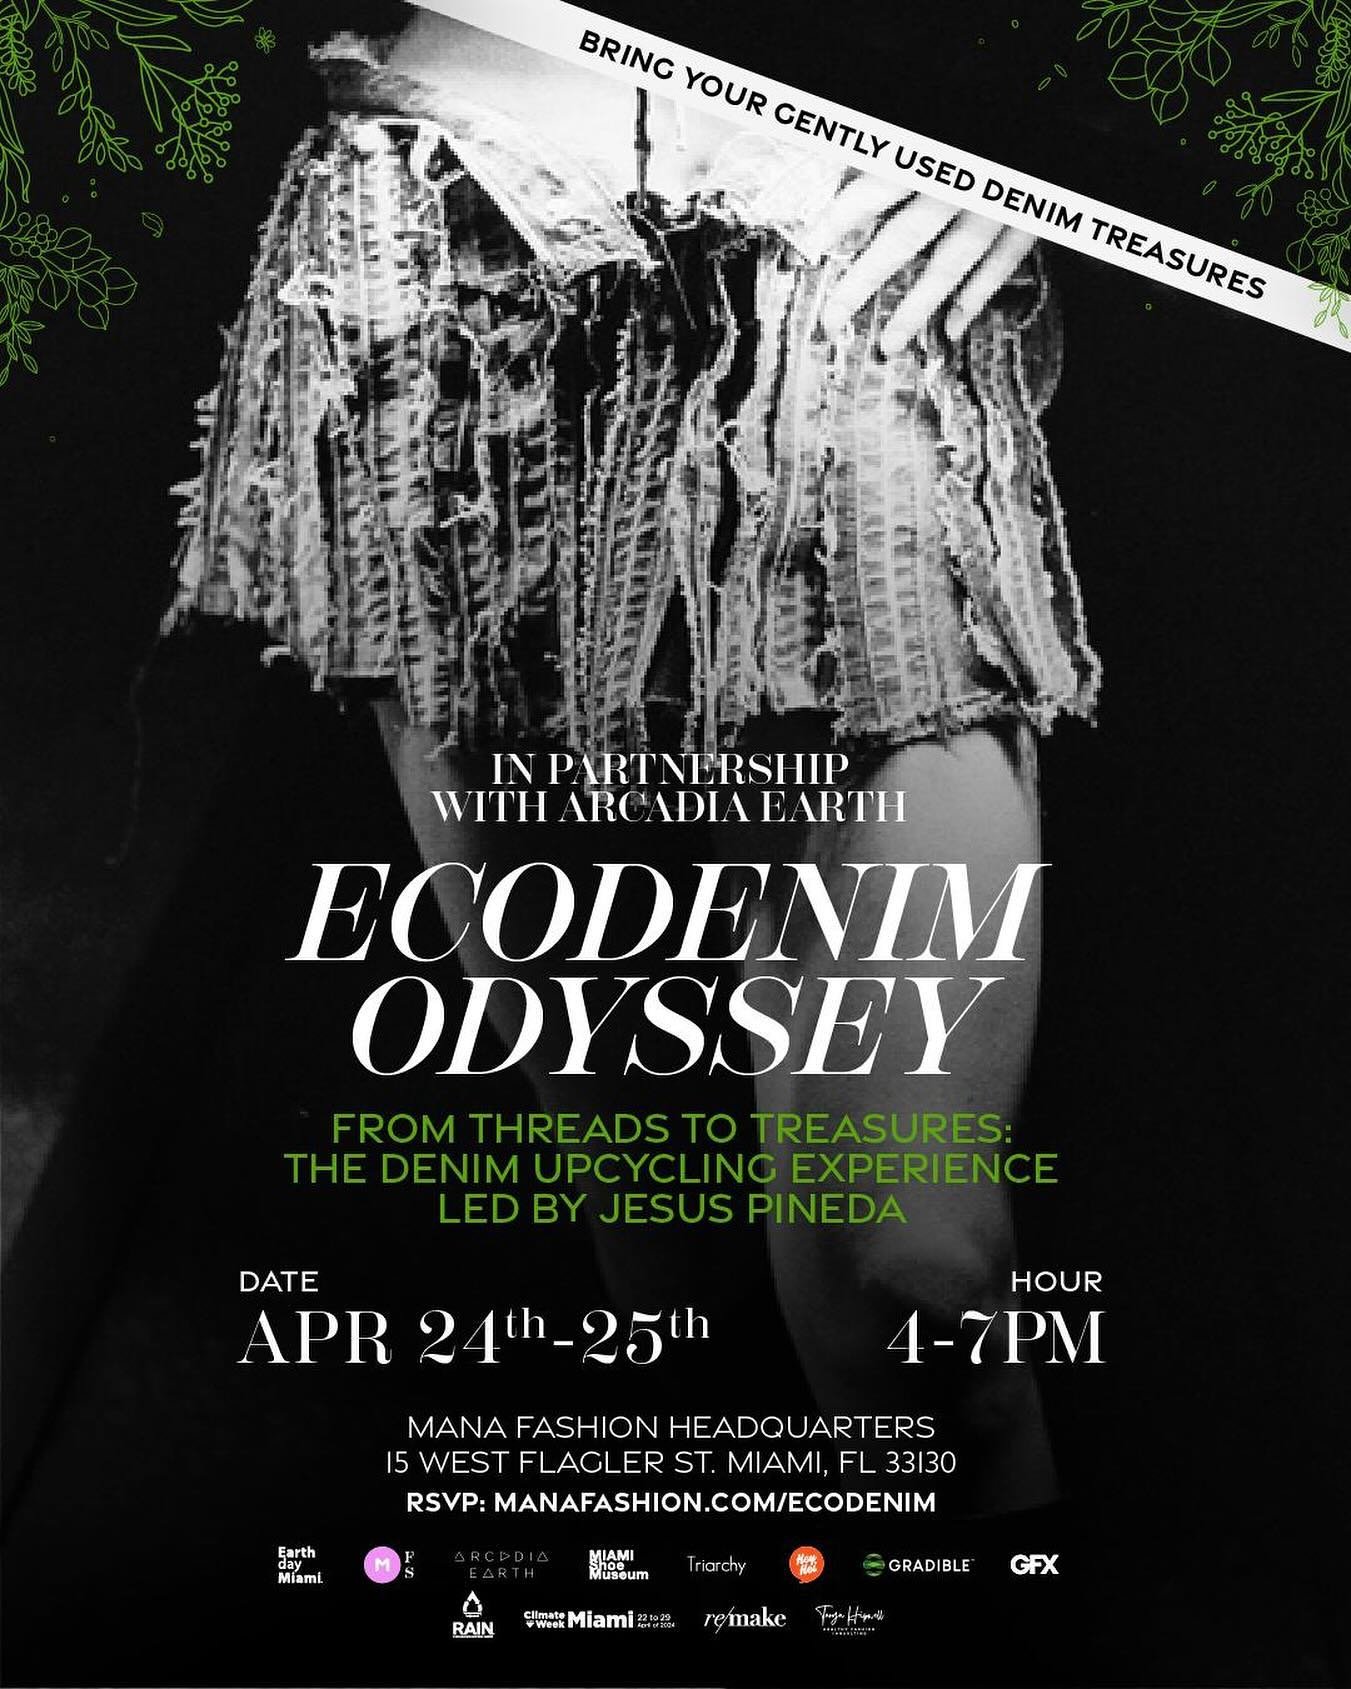 Happy Earth Day 🌎 💚 

Get ready to reimagine denim at our EcoDenim Odyssey event this Week.

Dive into a denim experience led by @vlackbook, where you can upcycle your denim pieces into something new and exciting. Bring your denim and let your crea